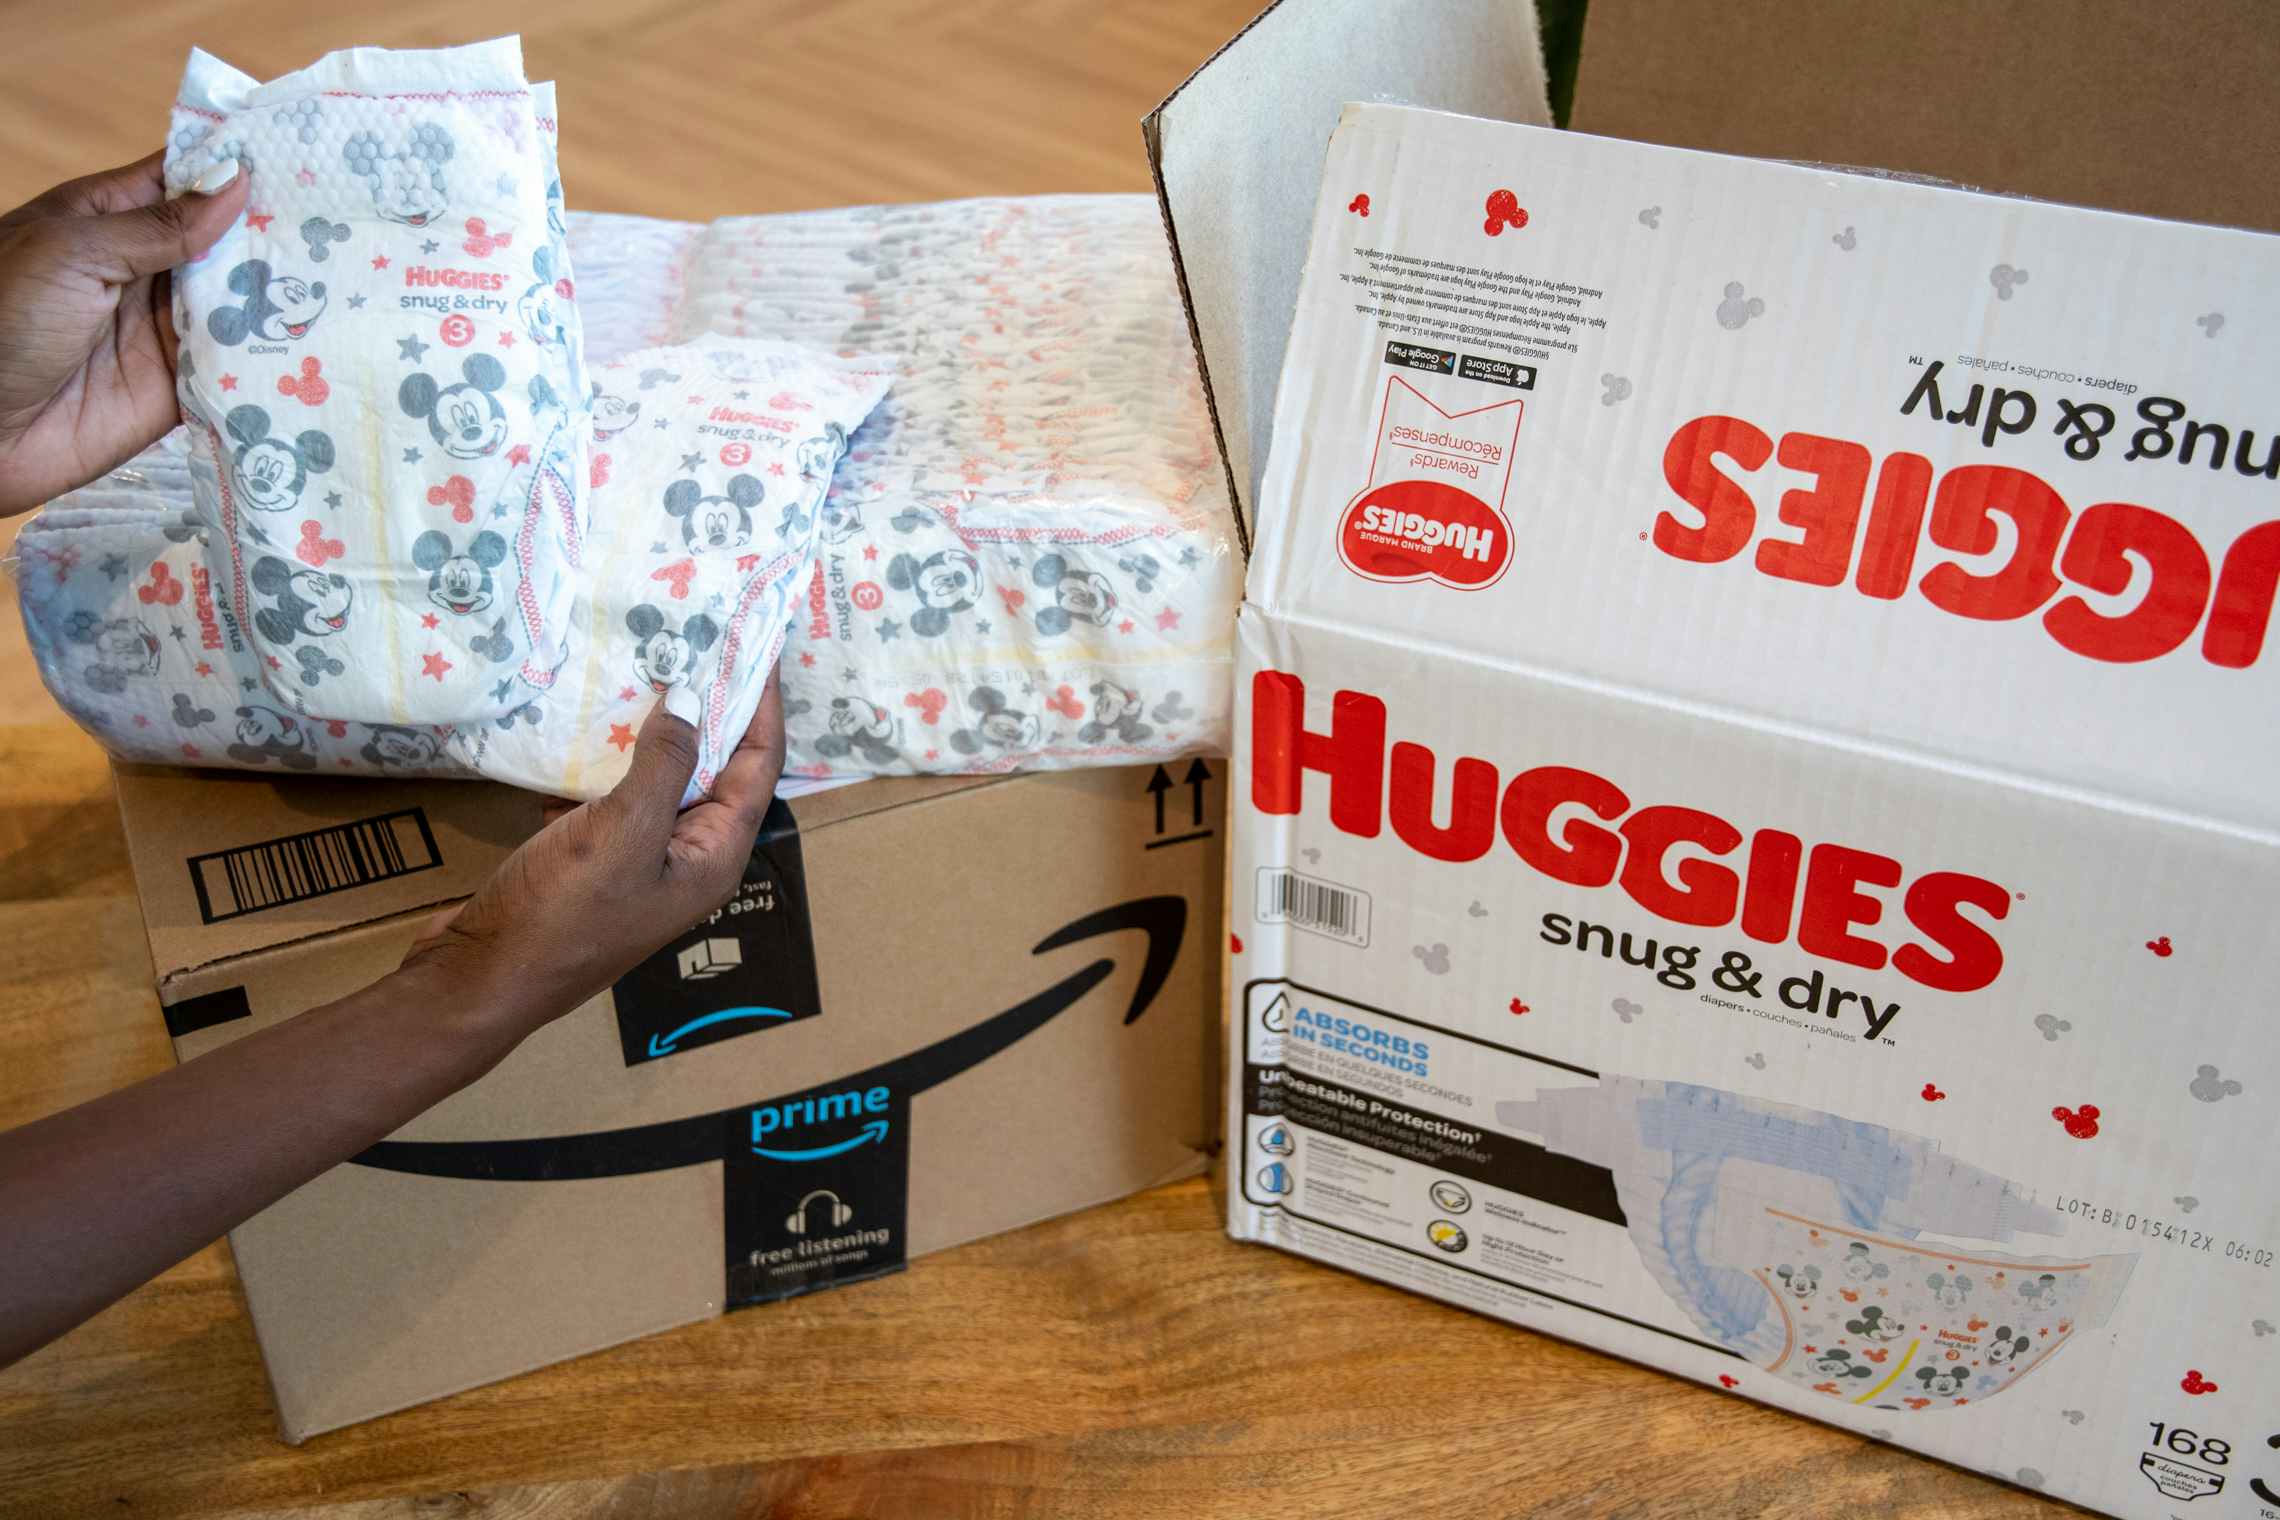 A person's hands holding up a Huggies diaper next to the diaper box and an Amazon delivery box.